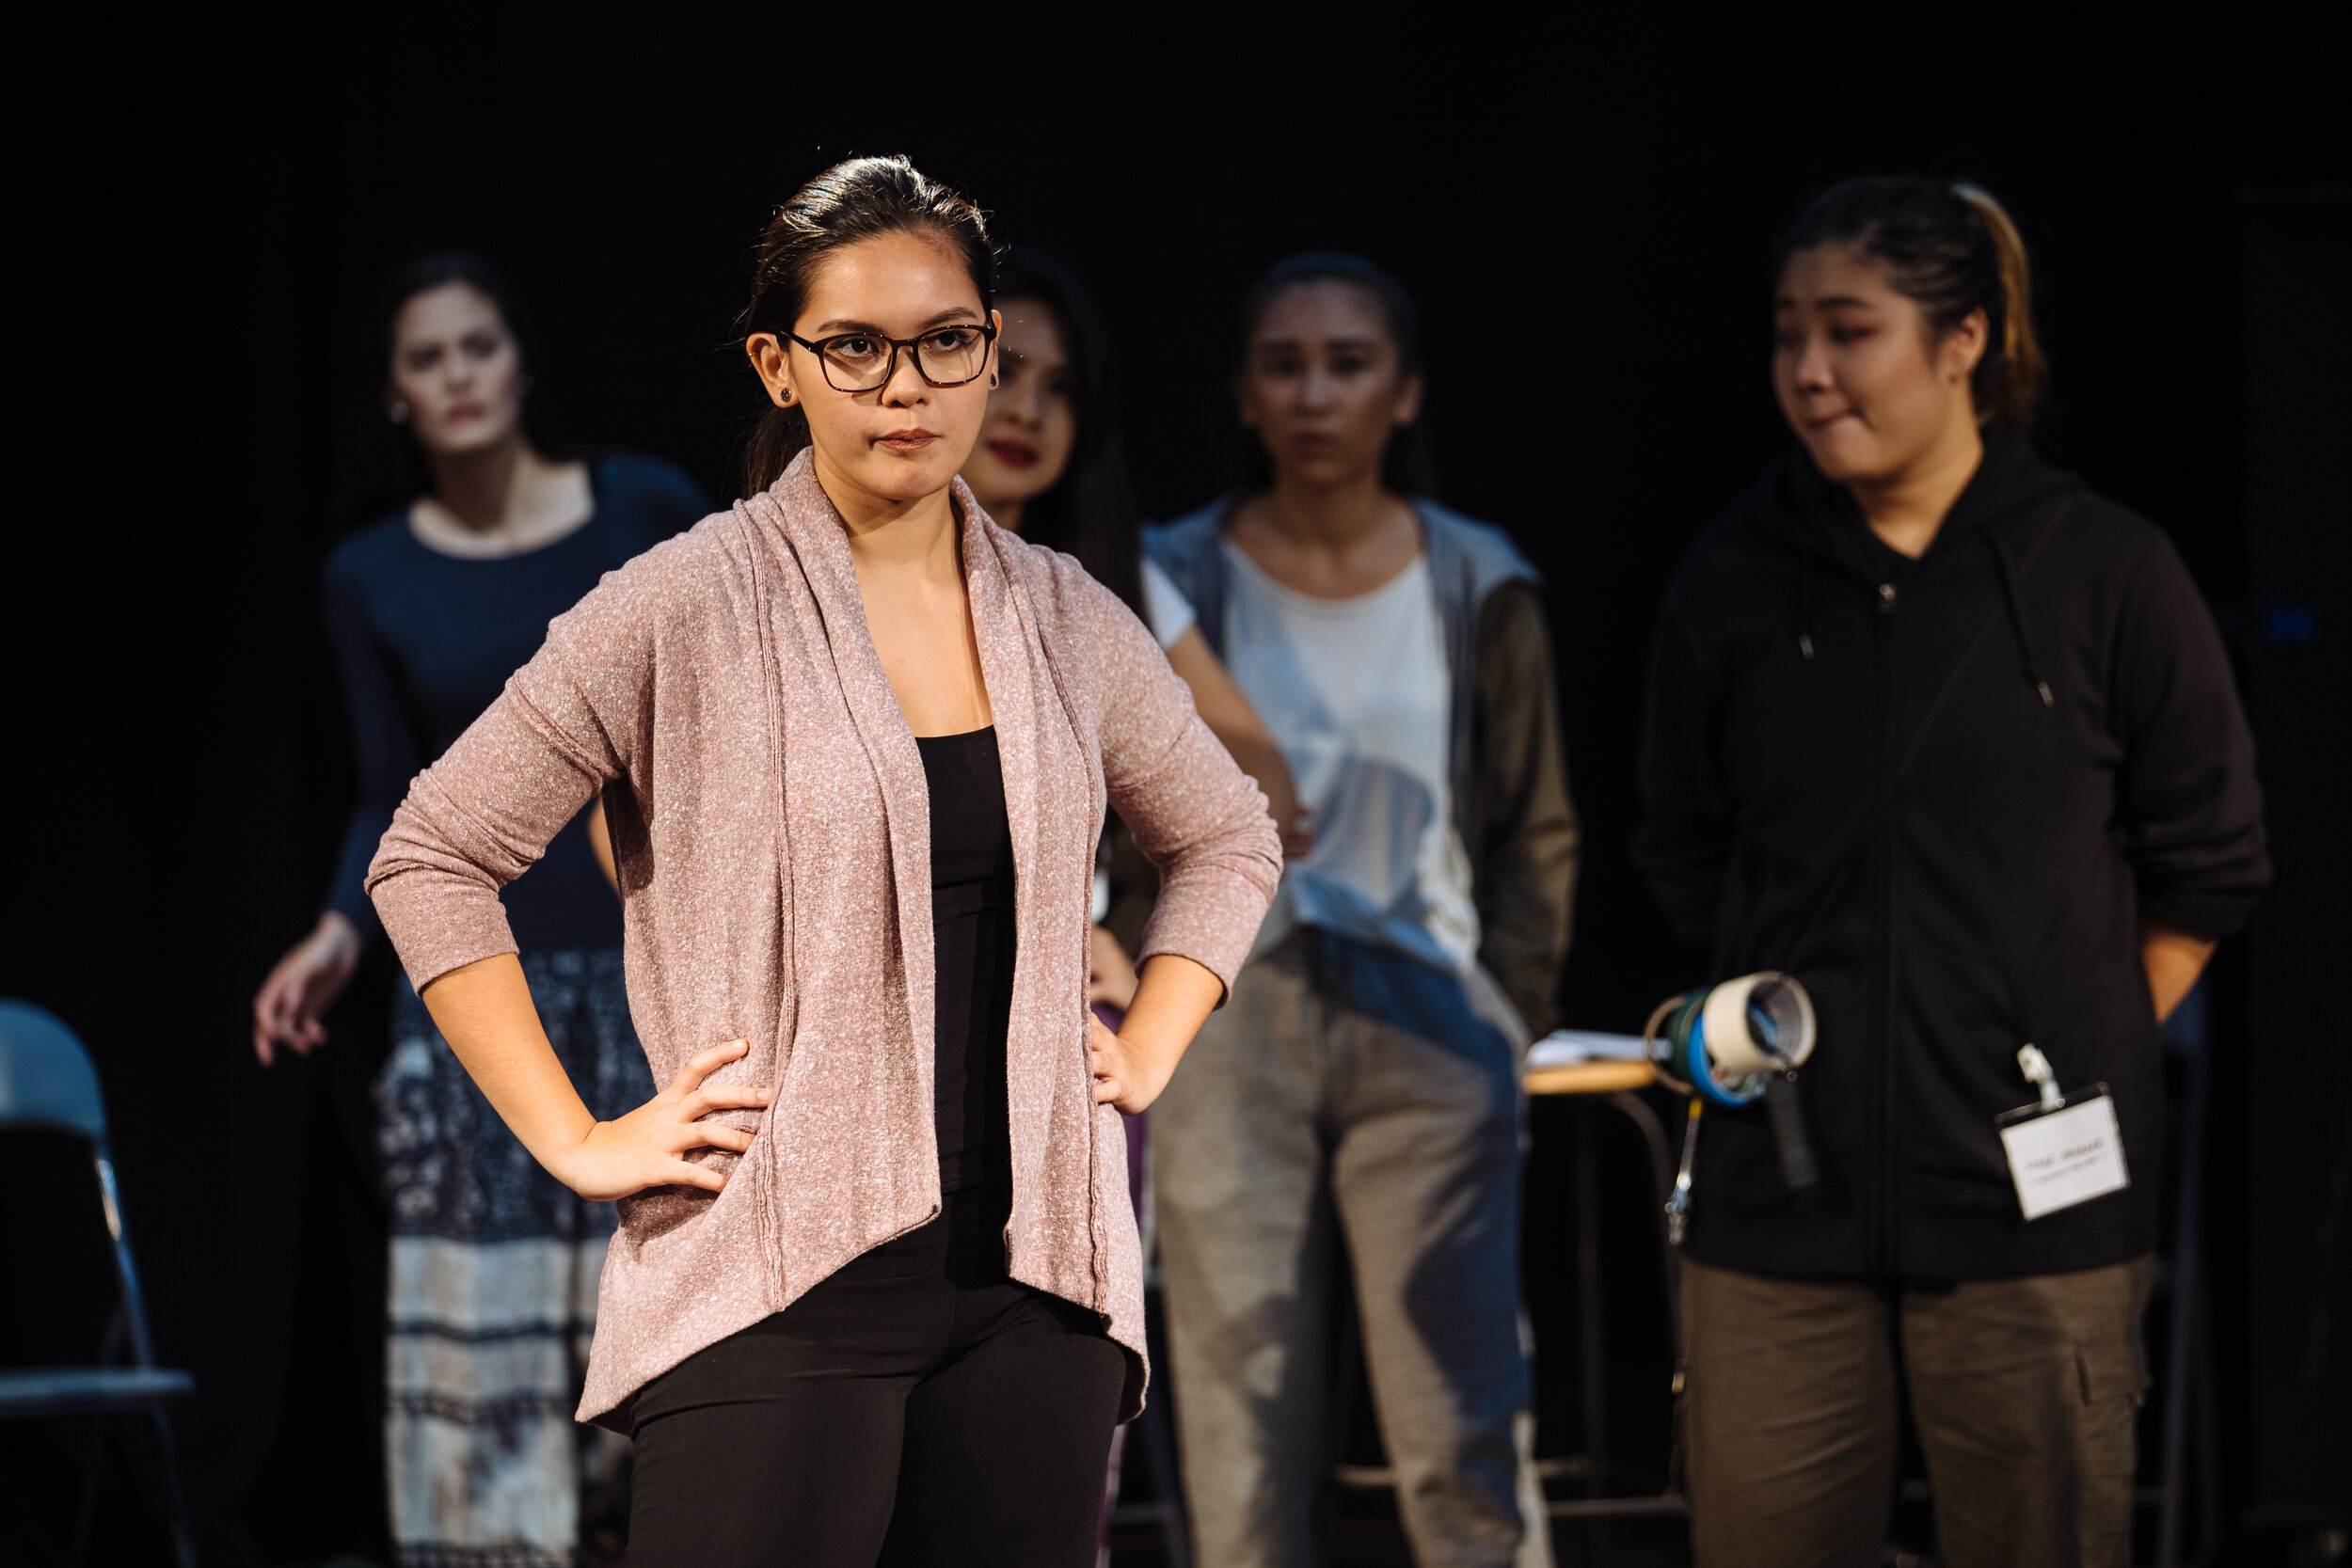  Six Characters Looking for an Author  As The Director  Dir. Leela Alaniz  Performed at LASALLE College of the Arts  Sept 2019  Photo by Crispian Chan 